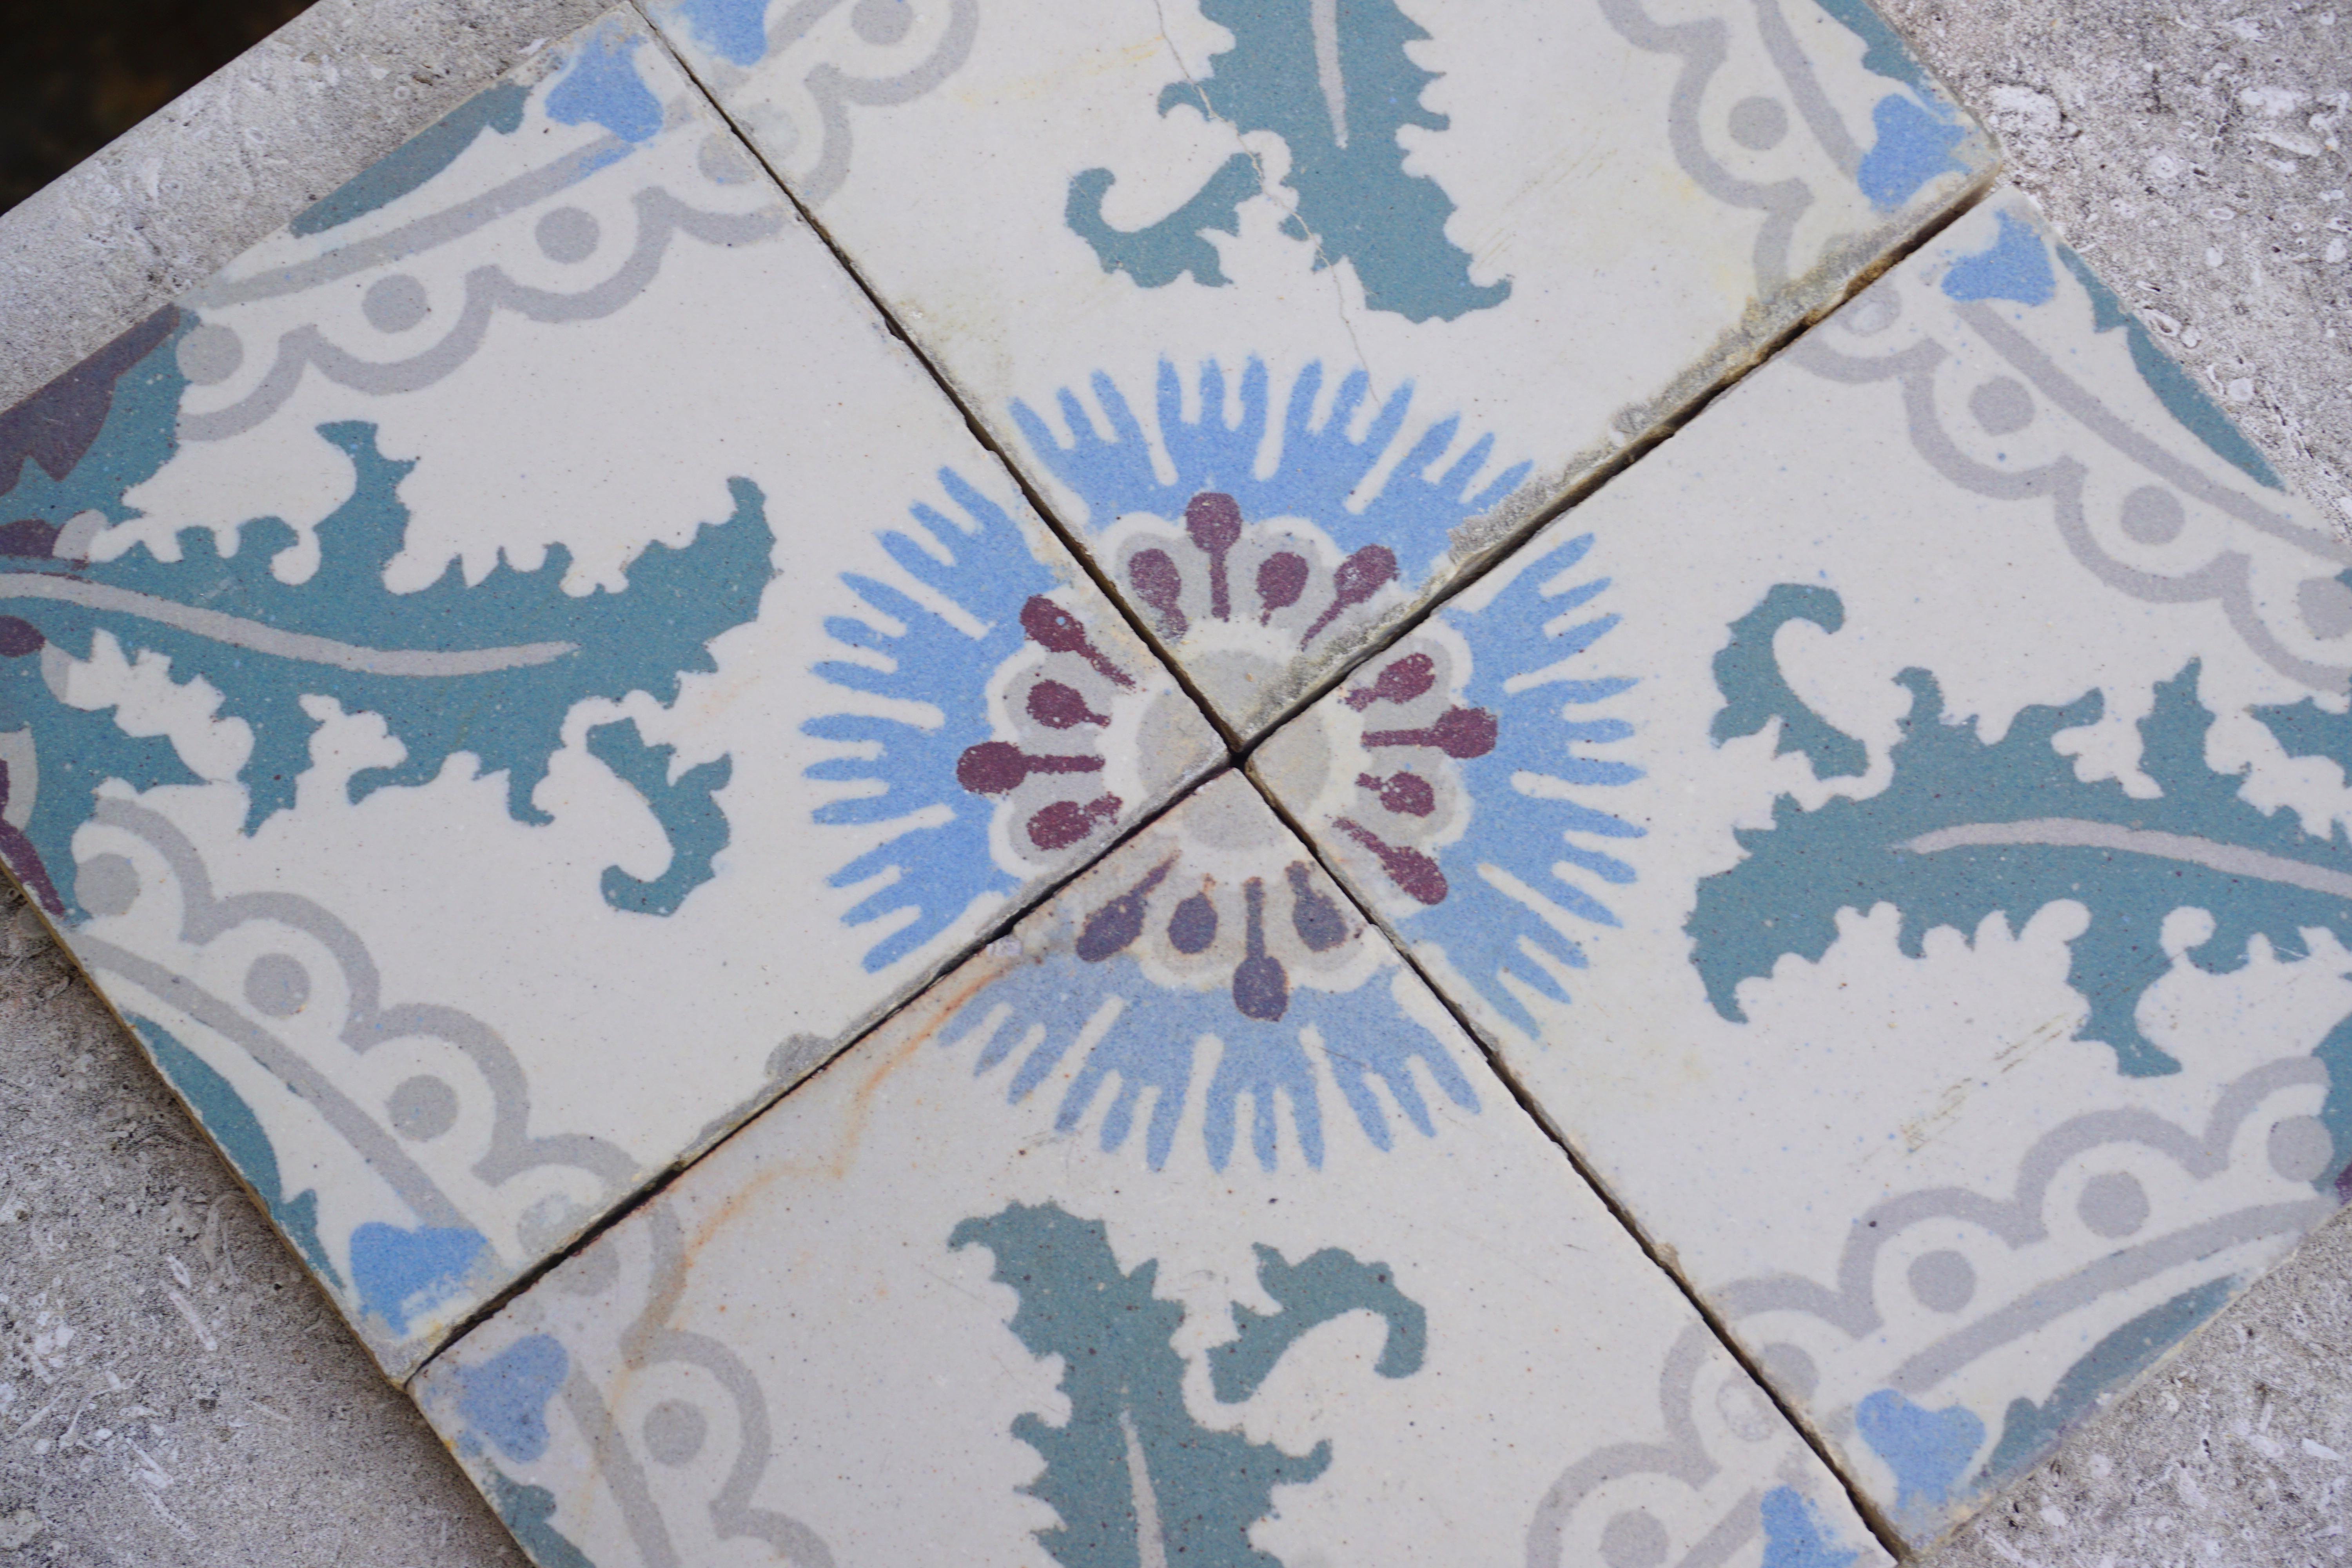 Hand painted, antique stone tiles. 

Total lot of 670 pieces, 100 square feet, each piece measuring 5'' x 5''.